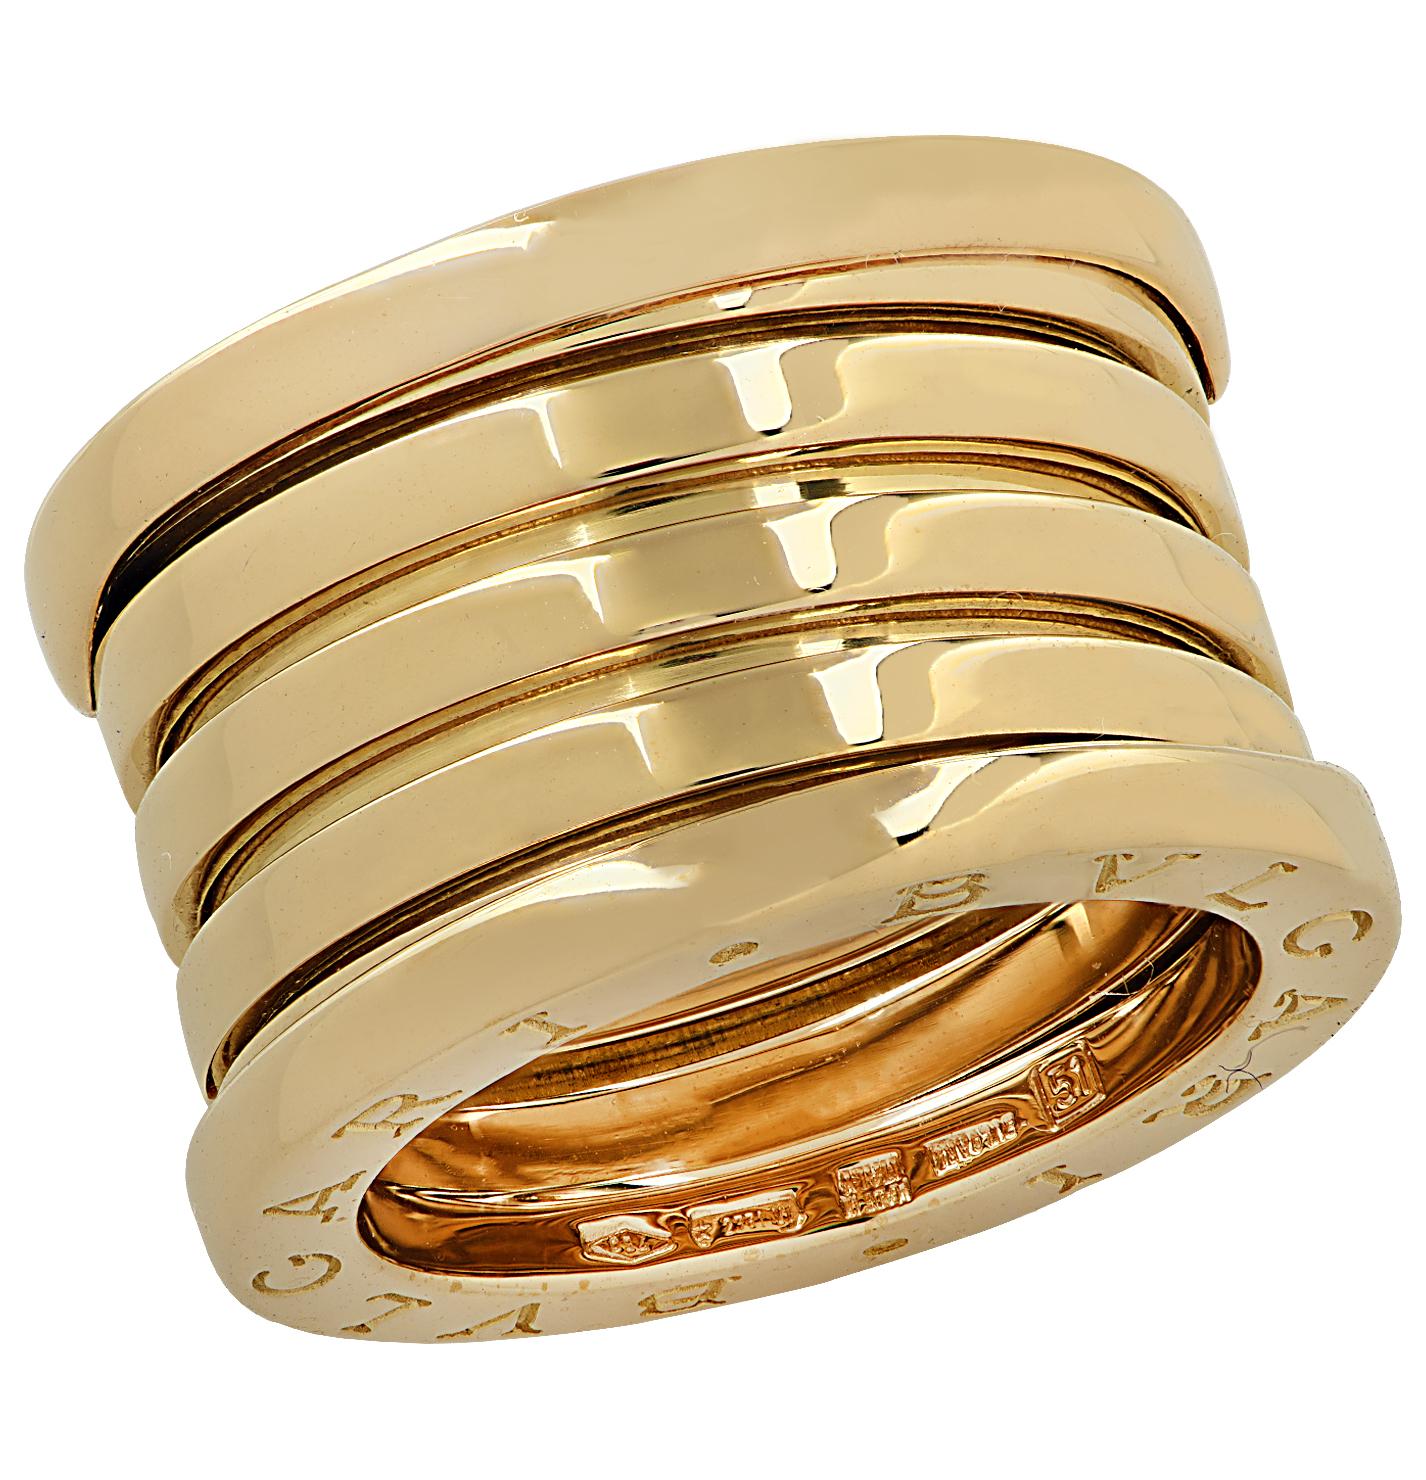 From the House of Bvlgari, this stunning B.Zero 1 XXth Anniversary five-band ring features five bands crafted in 18 karat yellow gold. The outer bands are detailed with the Bvlgari logo. This iconic ring measures .5 of an inch and is a European size